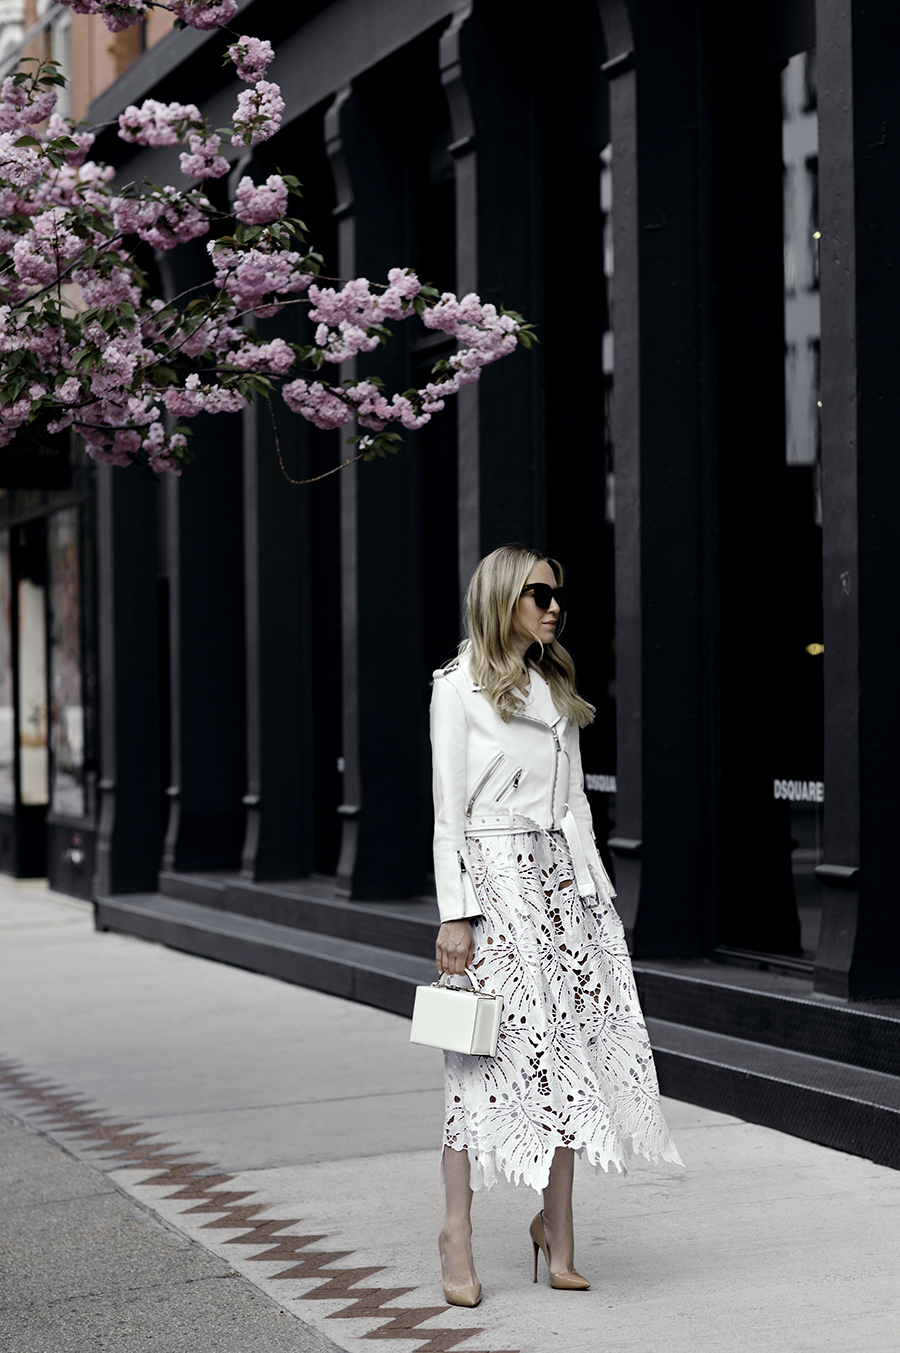 Helena from Brooklyn Blonde spring dresses, white floral lace dress, Tracy Reese lace dress, white monochrome outfit